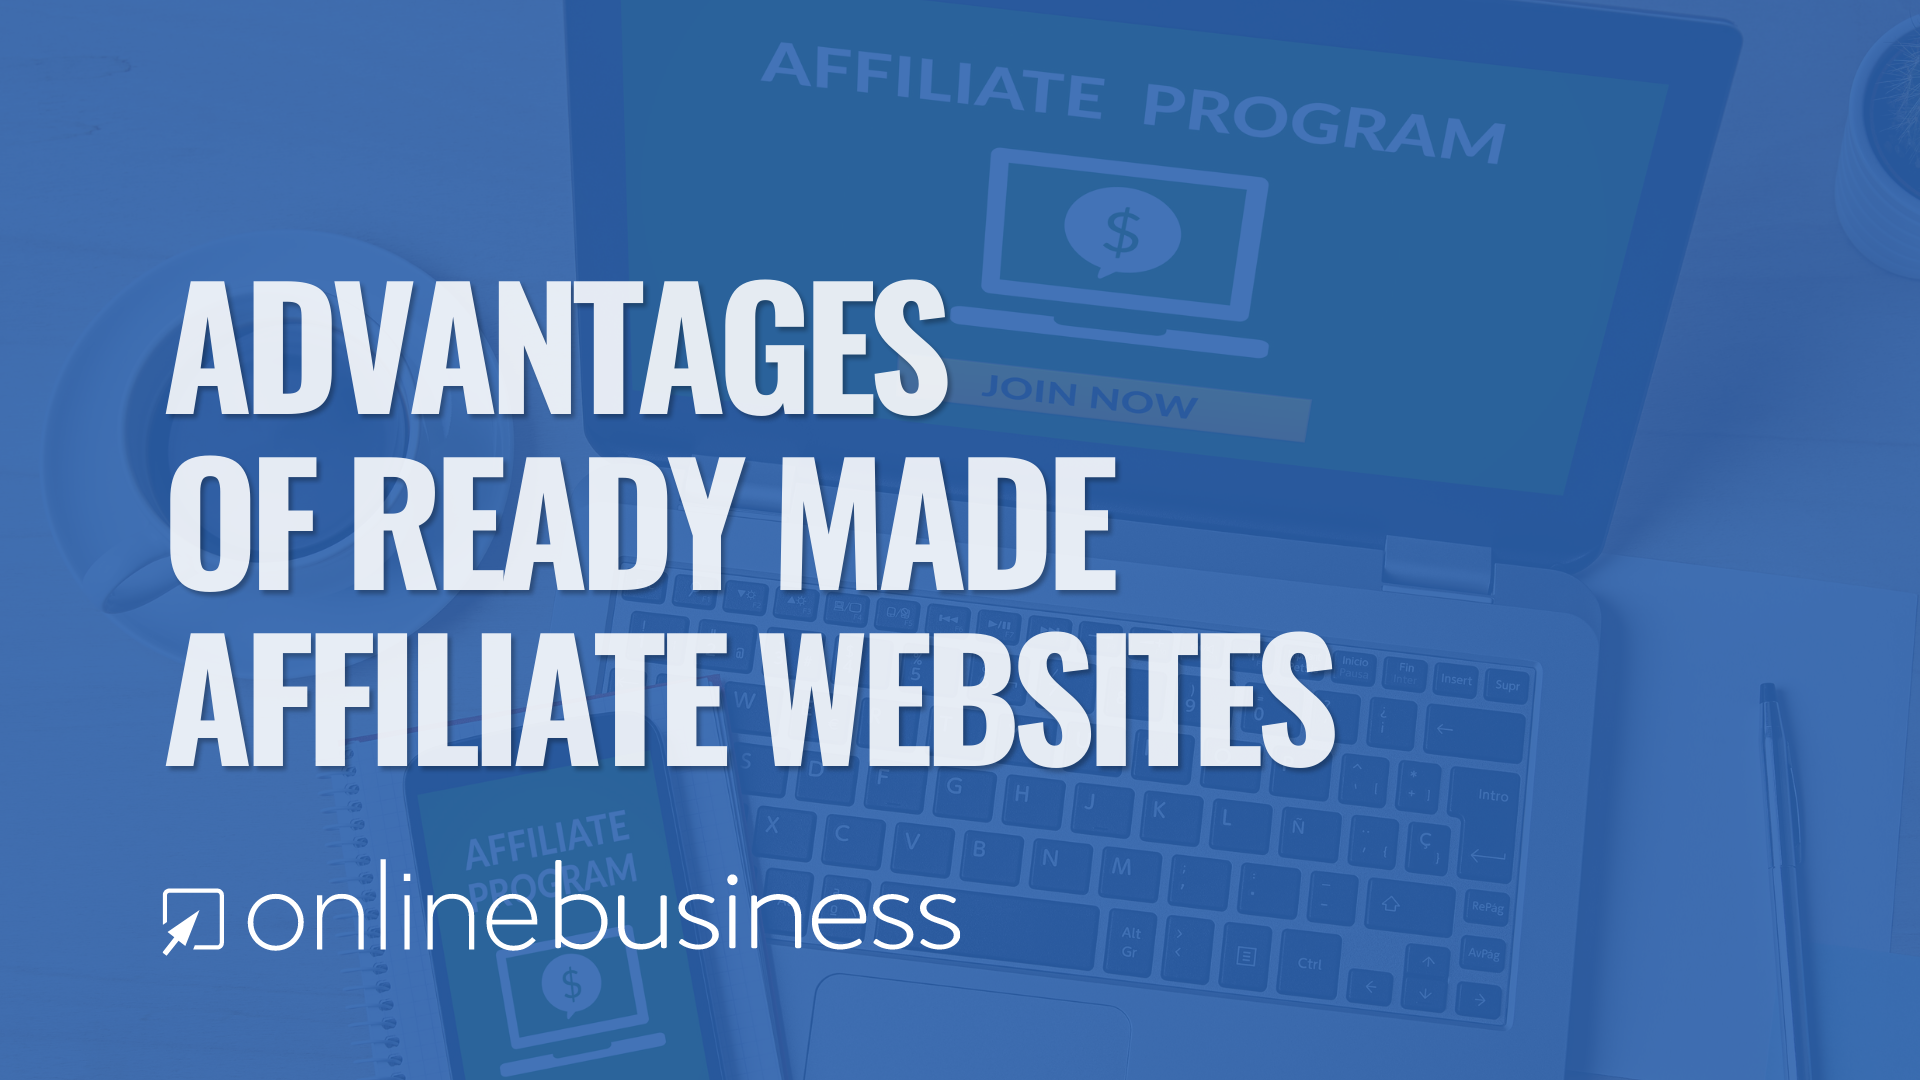 OnlineBusiness.com Discusses the Advantages of Ready-Made Affiliate Websites